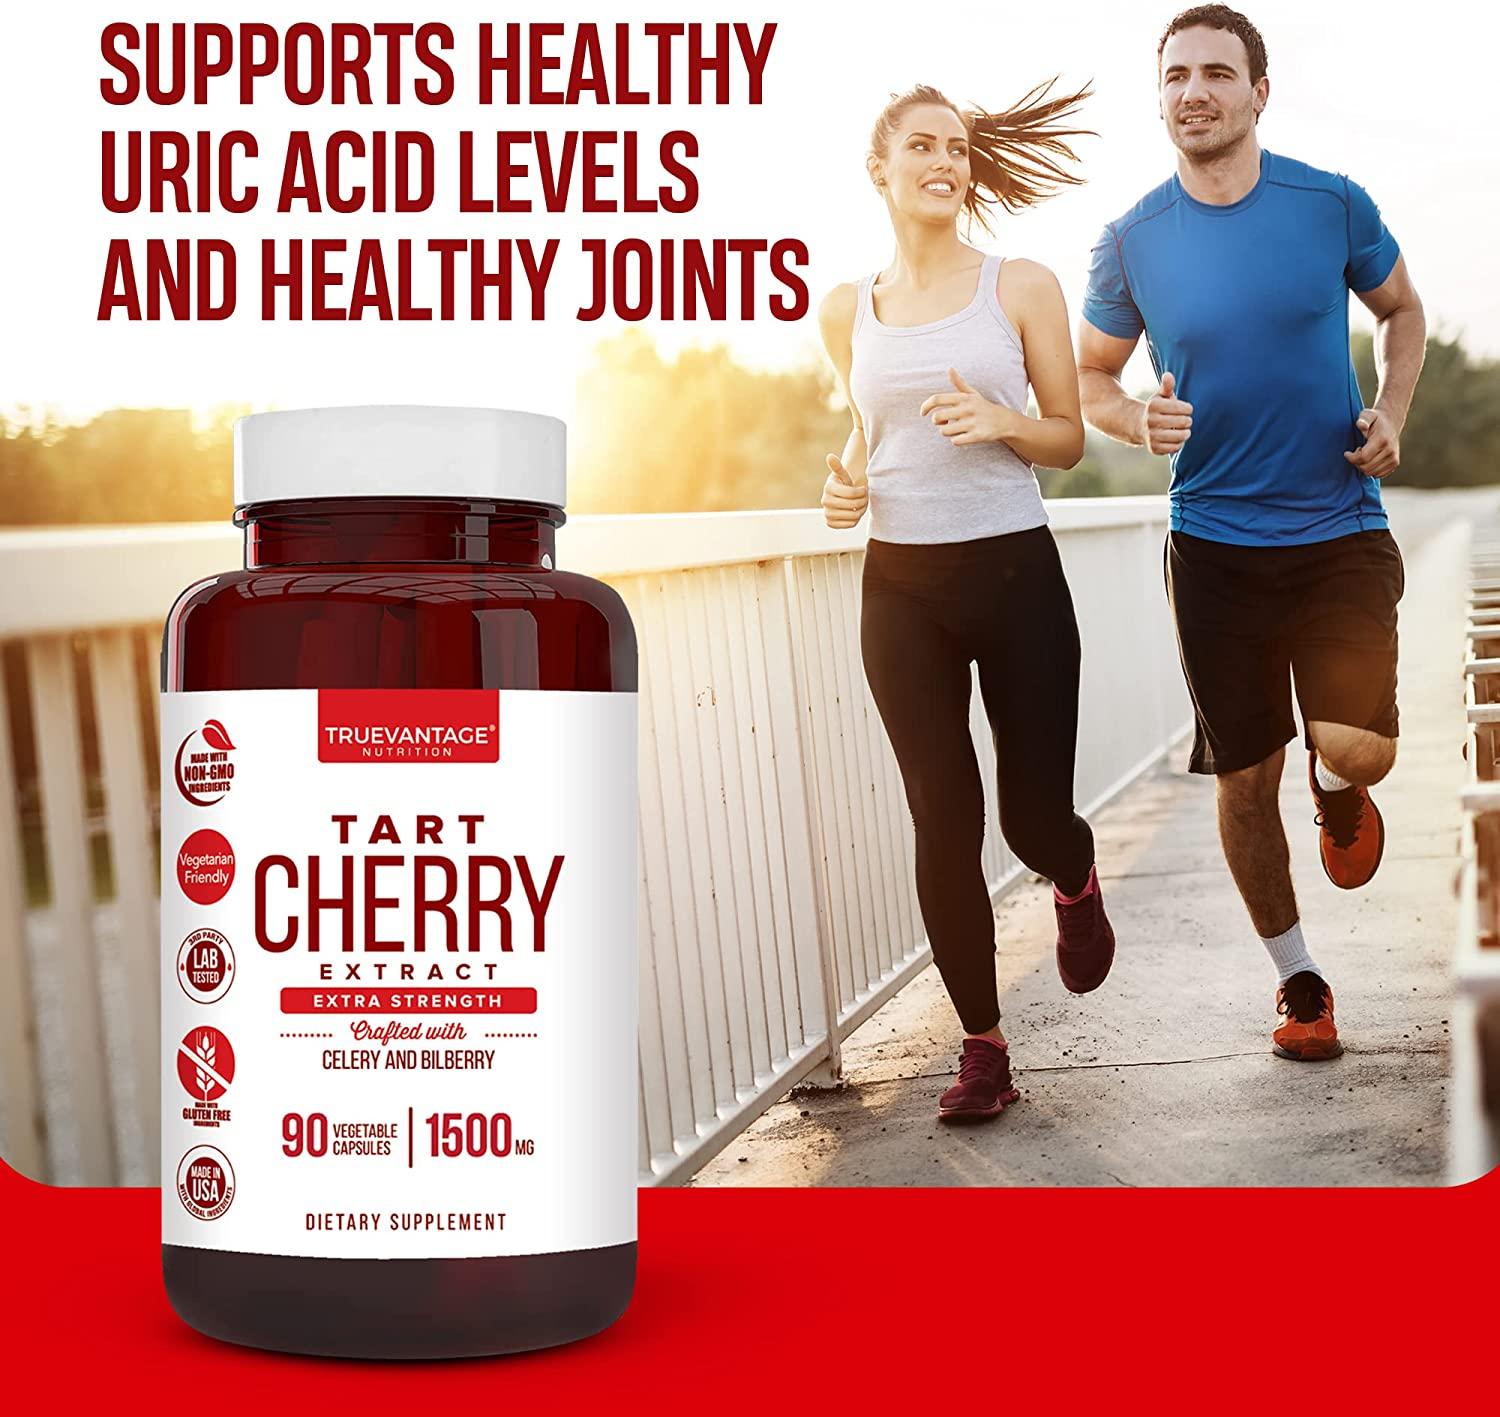 Tart Cherry Extract 1500mg Plus Celery Seed and Bilberry Extract